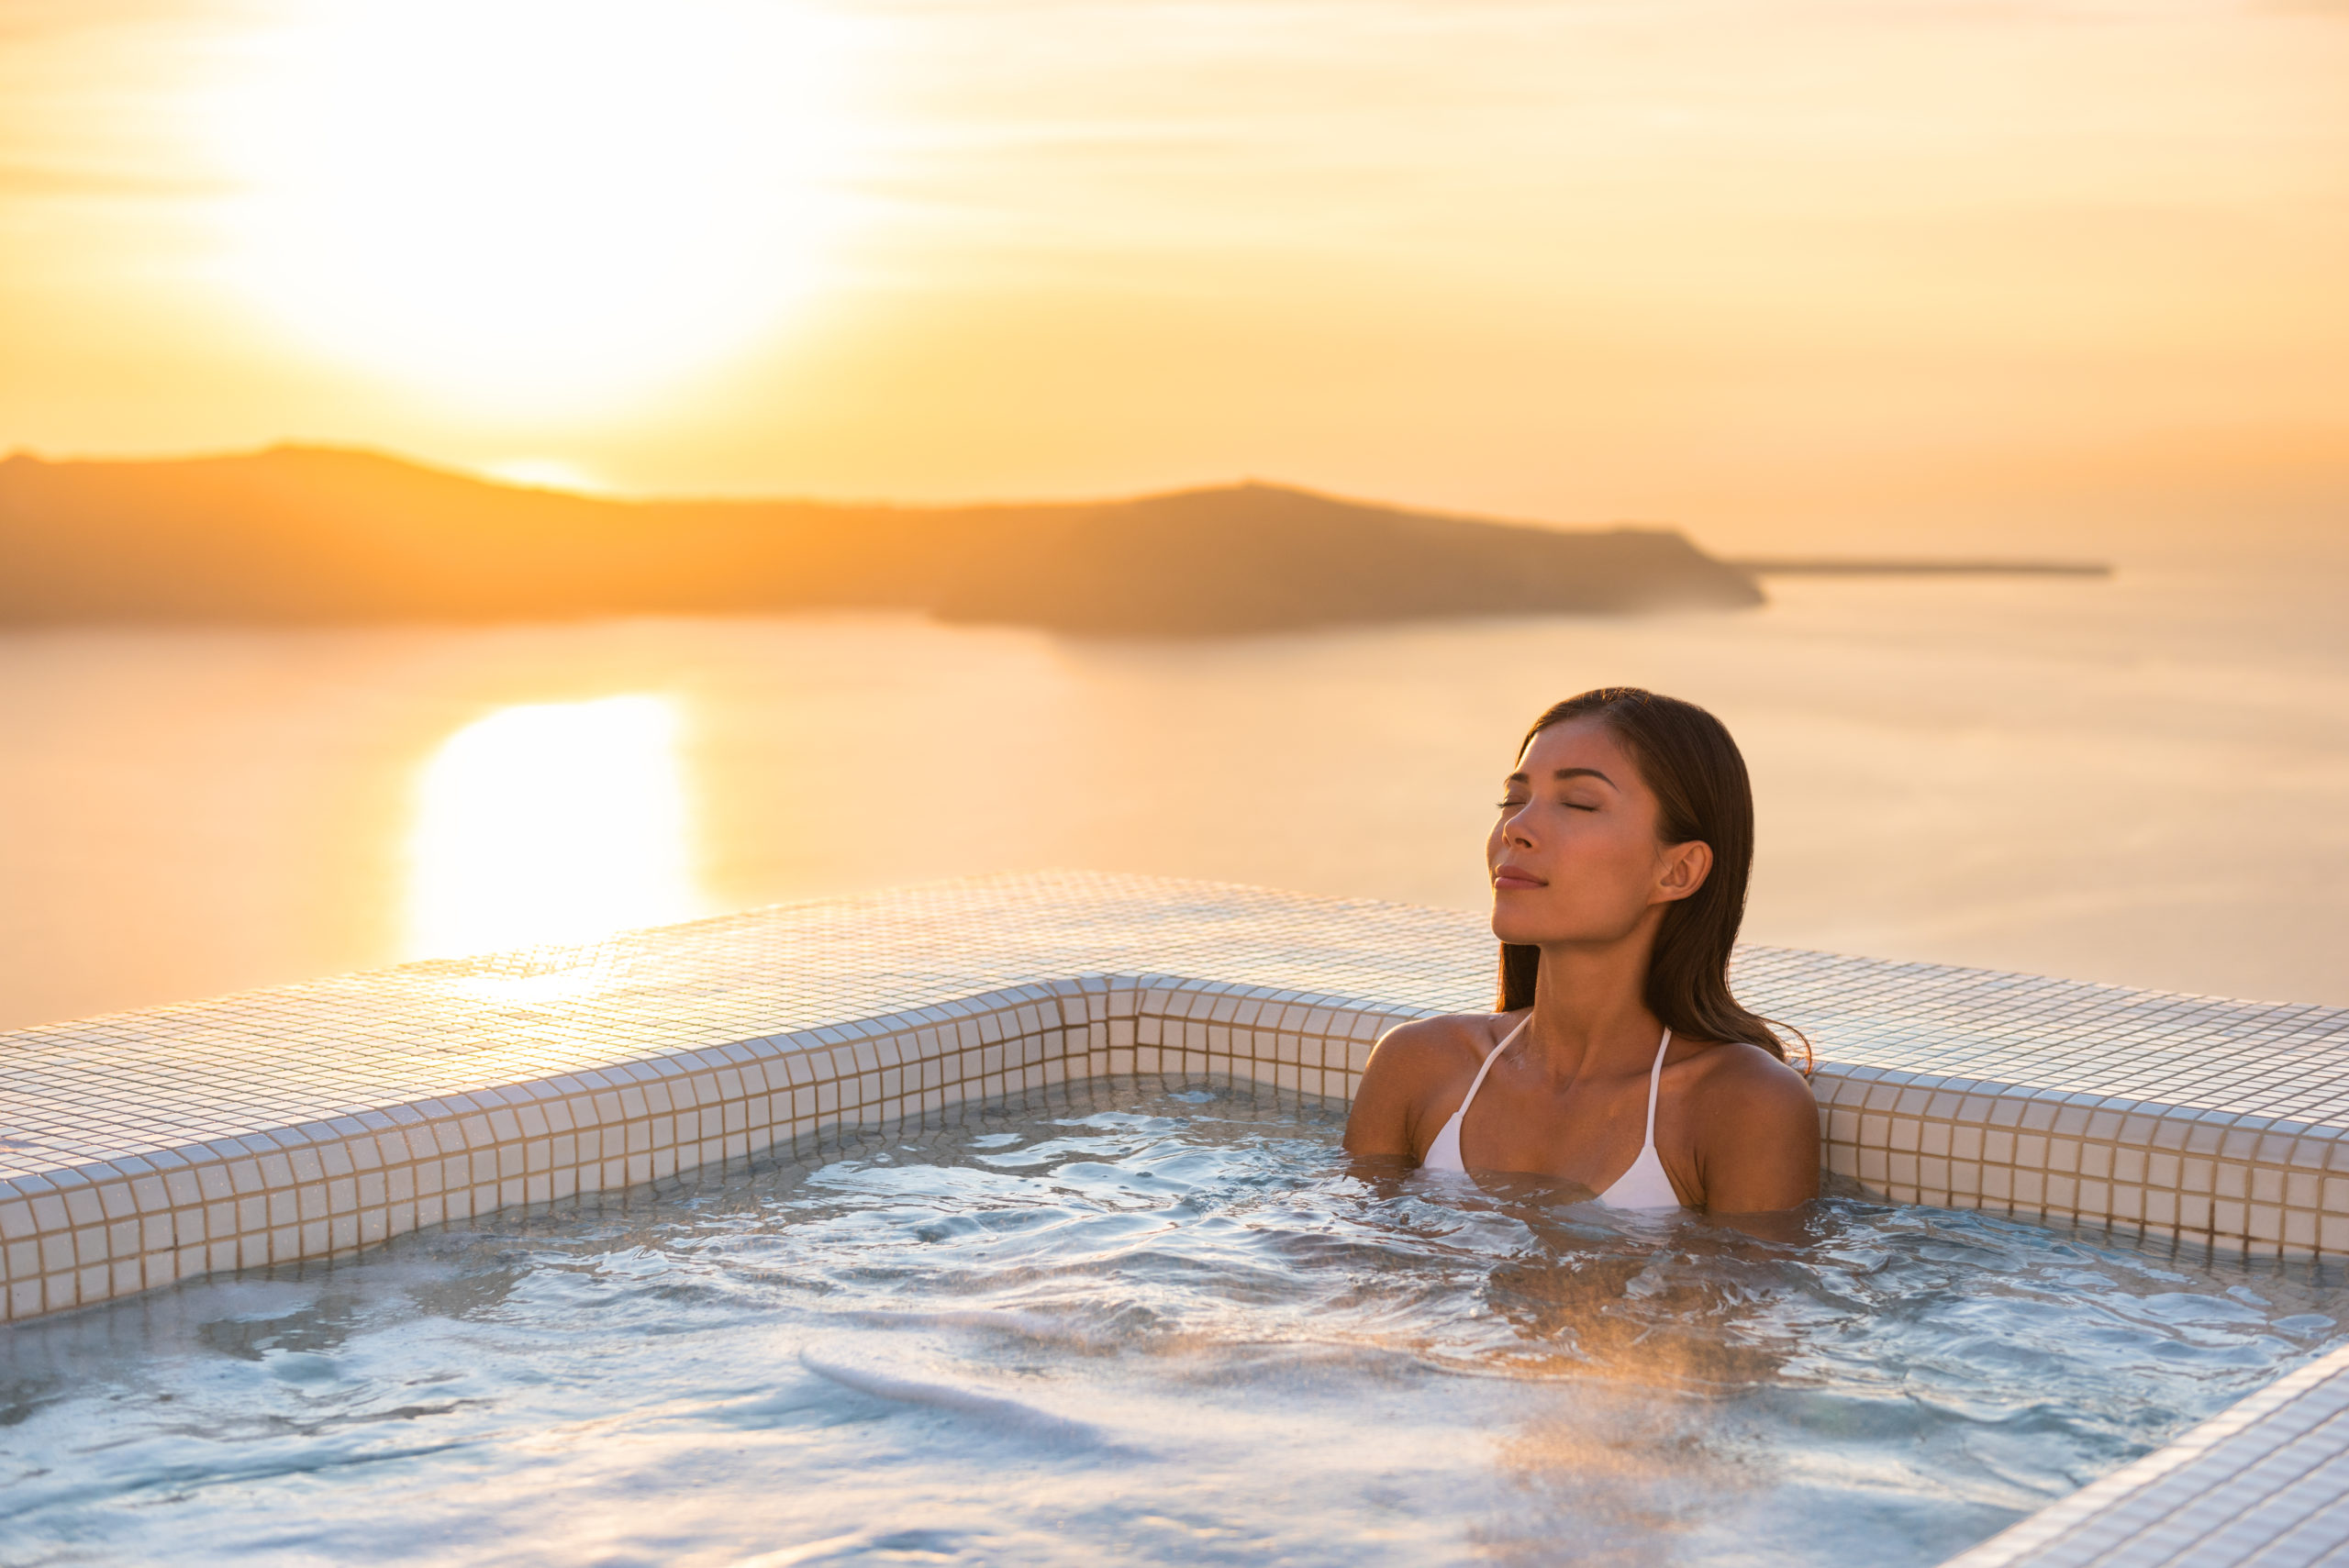 A woman relaxing by the pool at sunset, enjoying a serene and tranquil moment